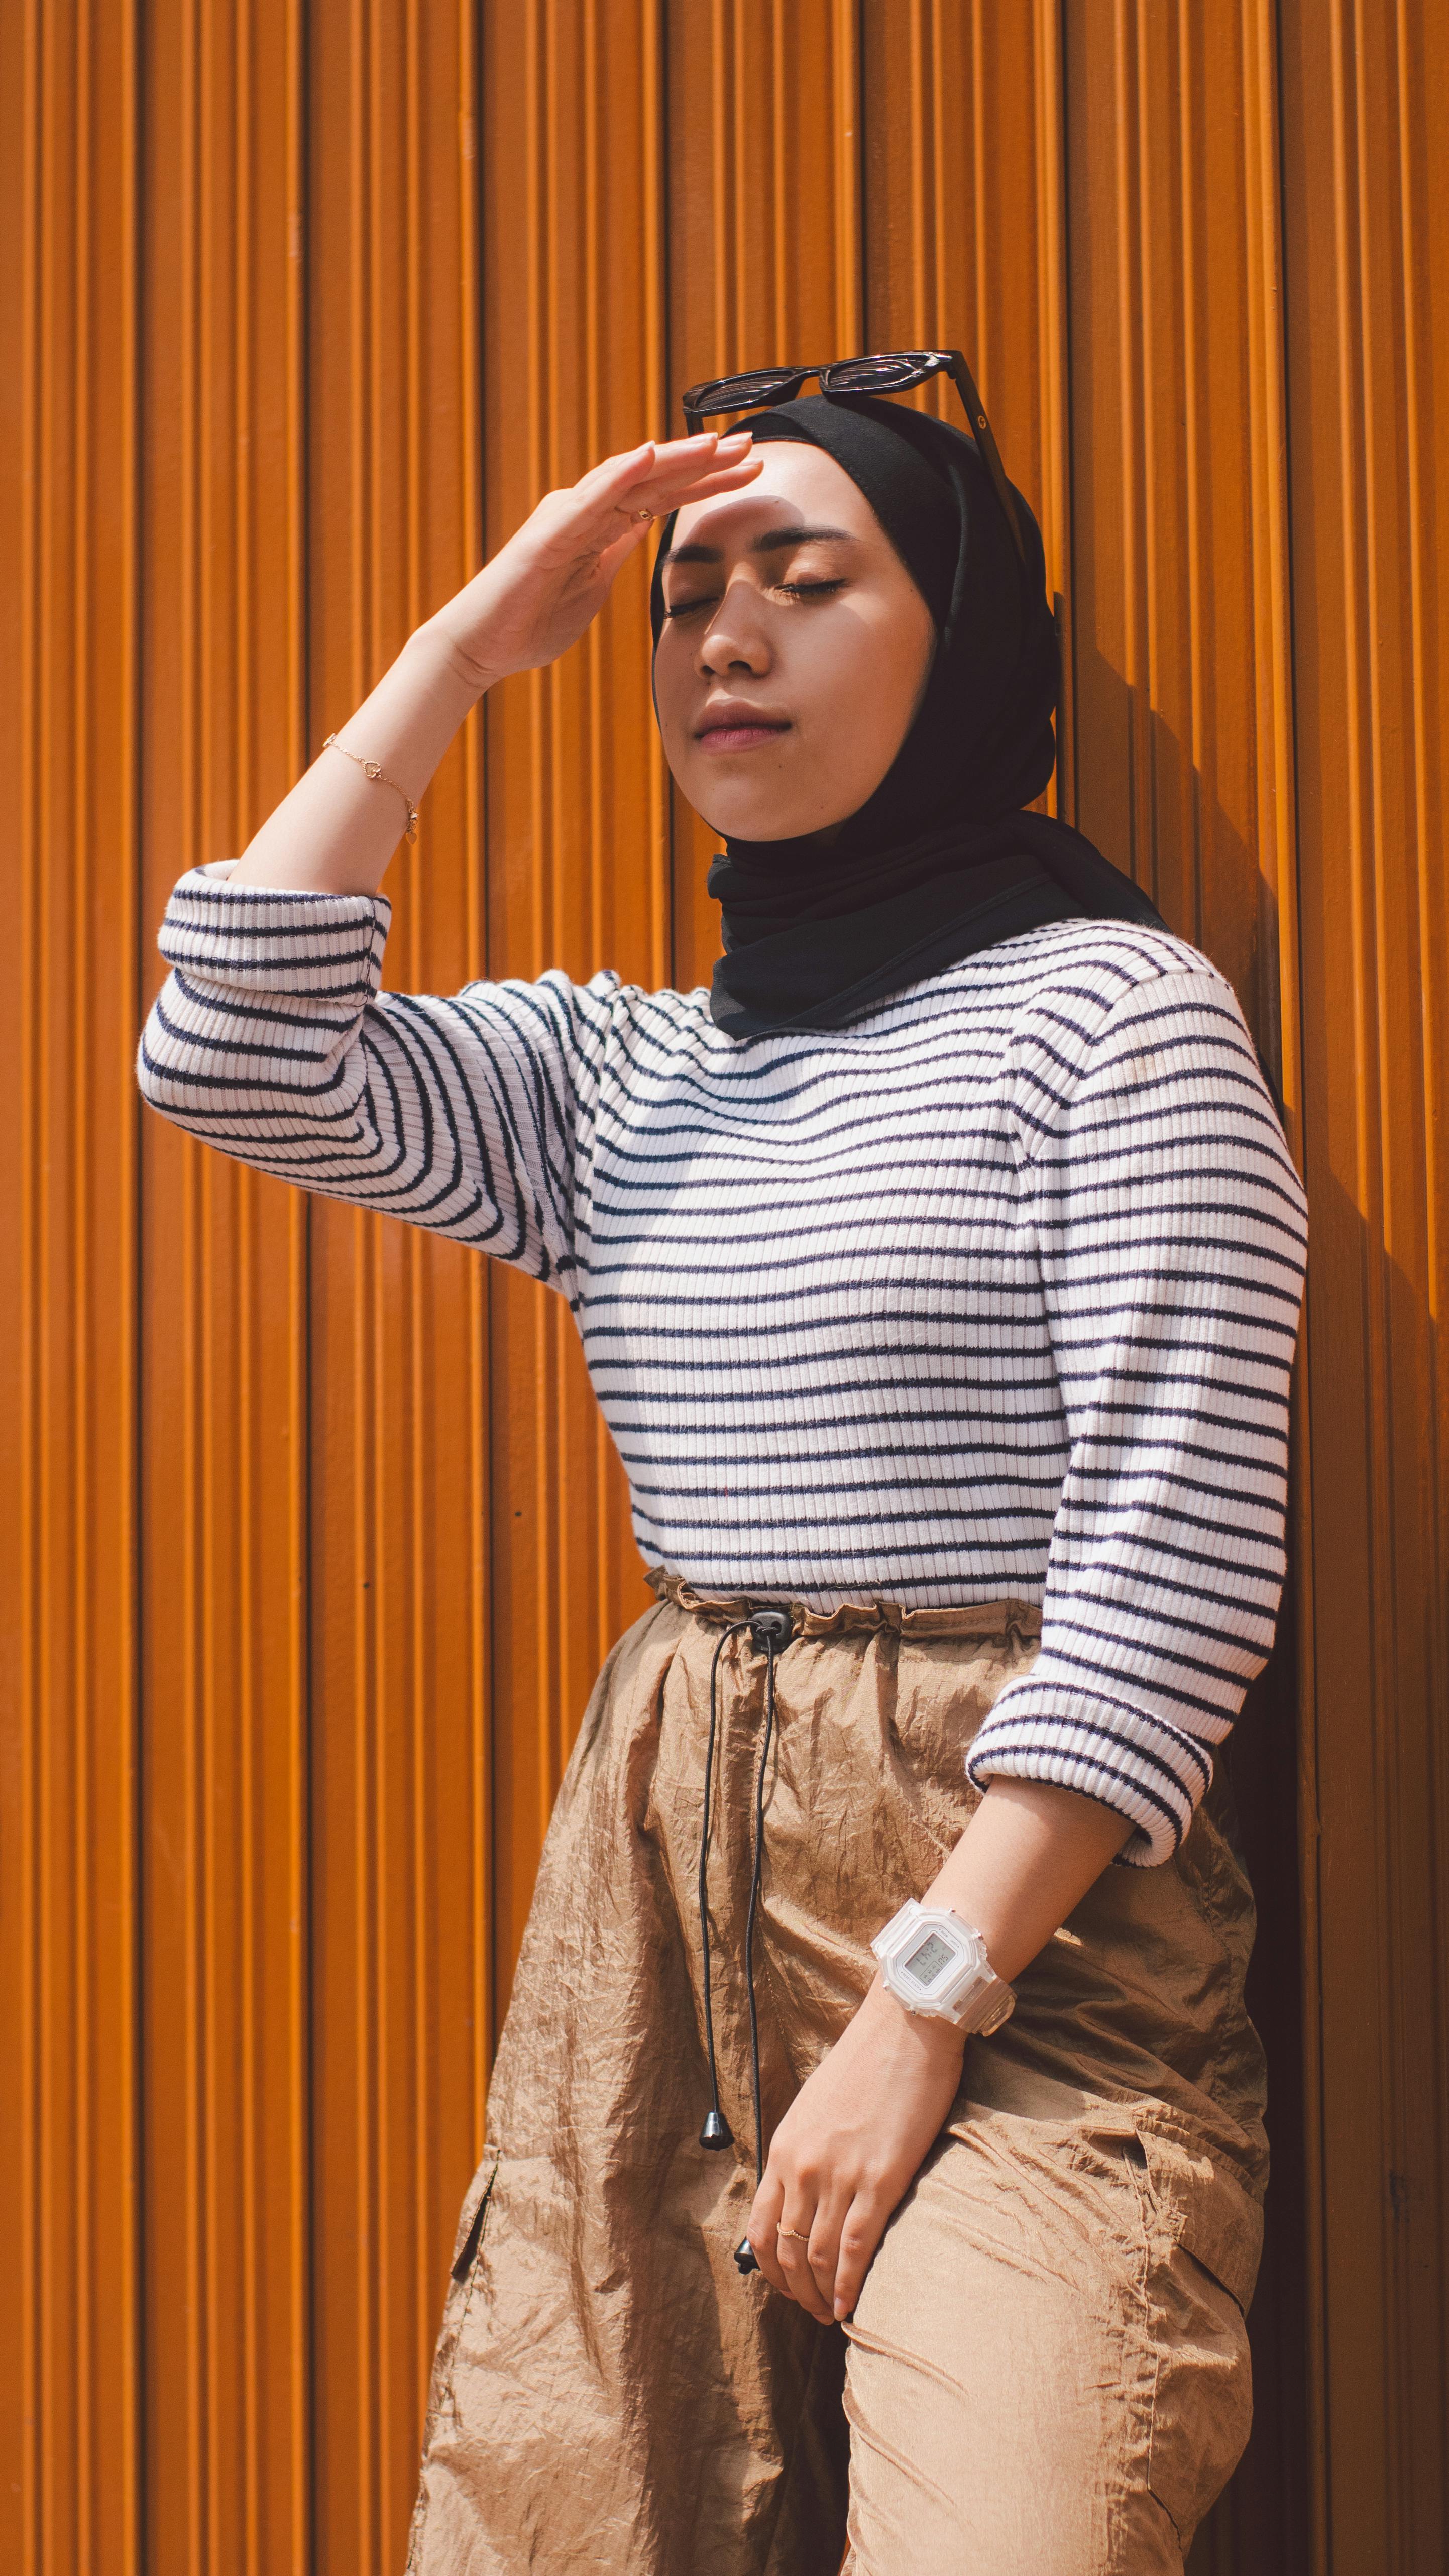 Kemeja Oversized and A Scarf OOTD  Article posted by jihanpachria